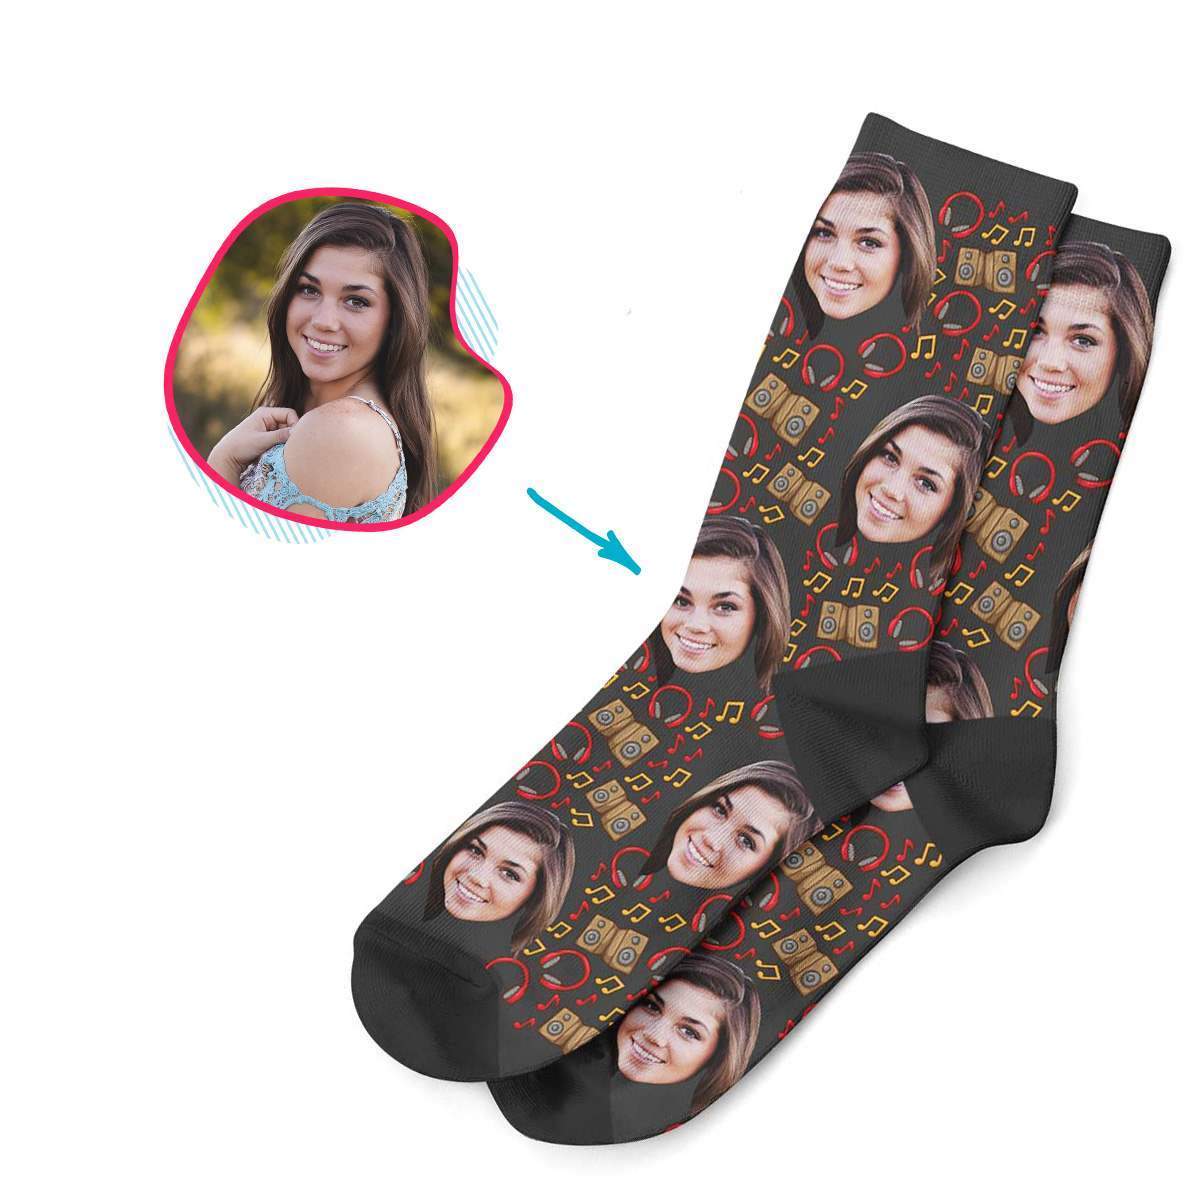 dark Music socks personalized with photo of face printed on them